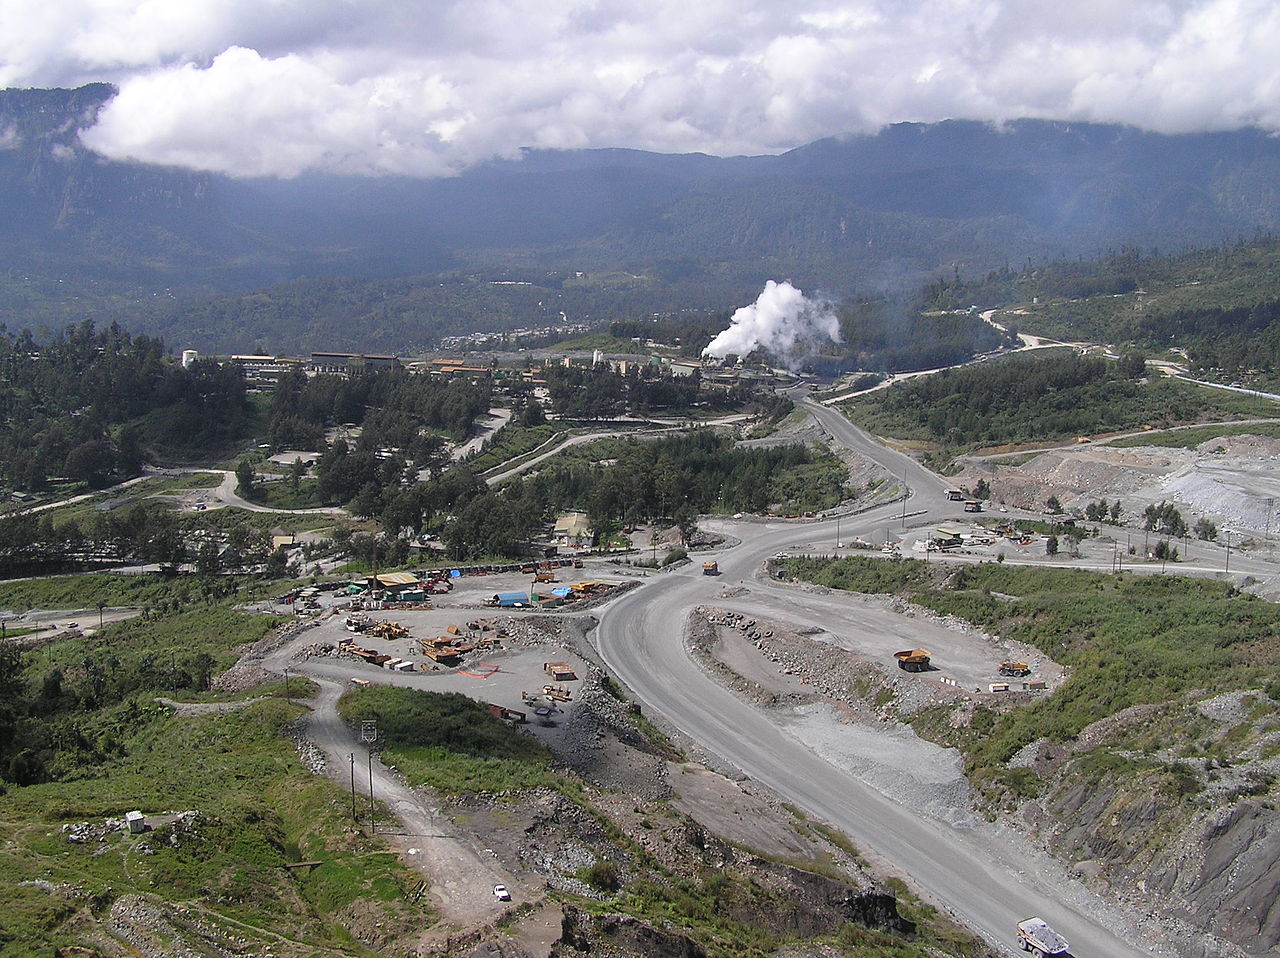 Barrick looking to reopen Porgera gold mine in Papua New Guinea